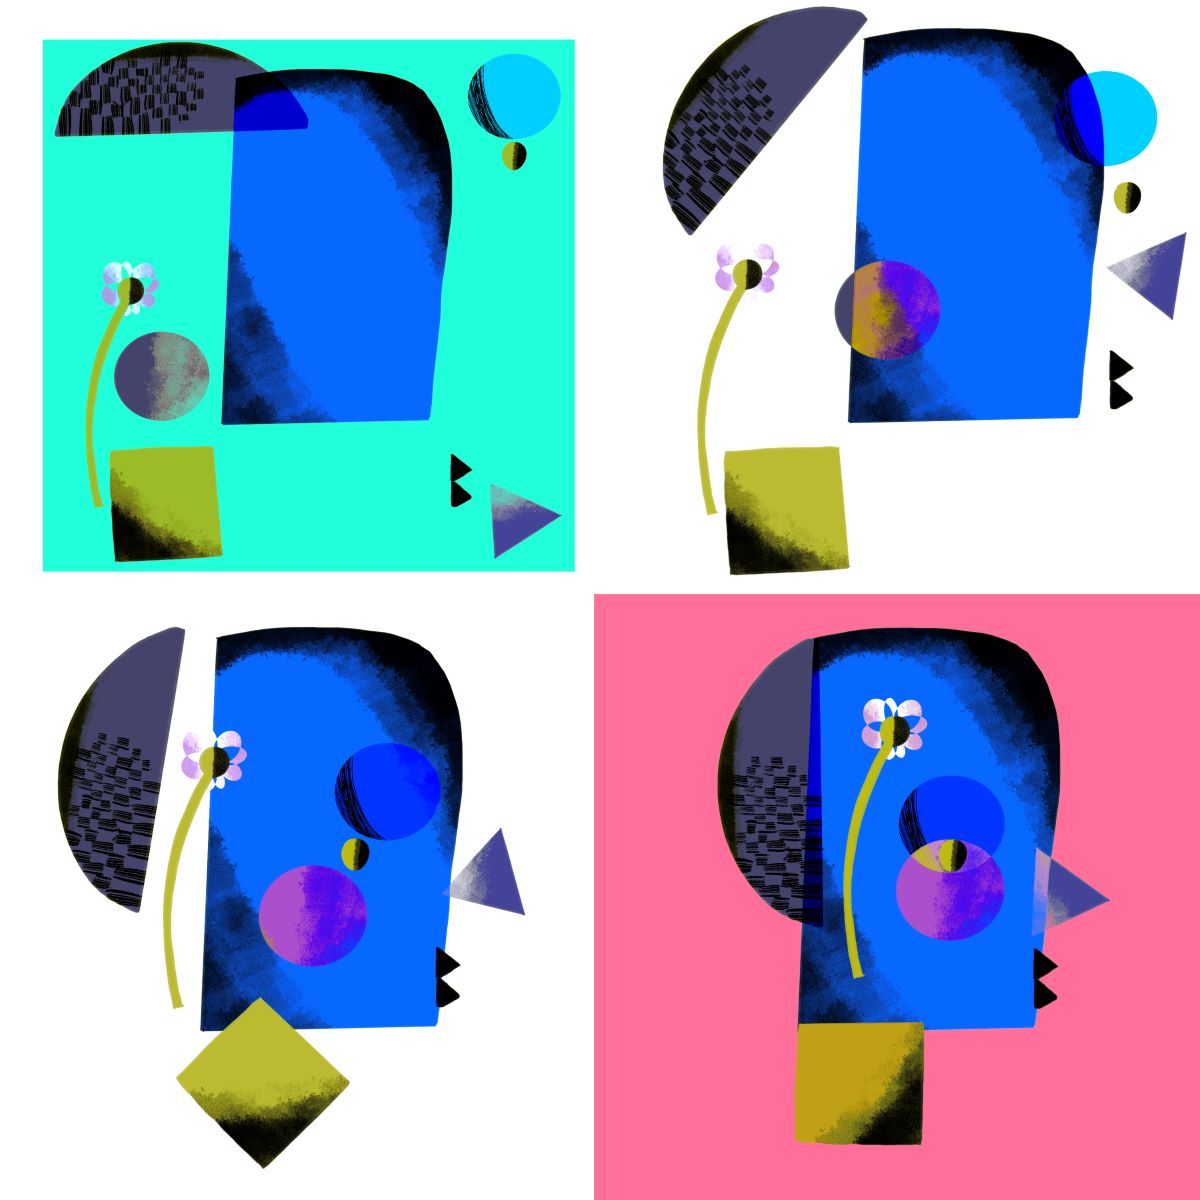 A print in four panels by Mitch Duncan. The backgrounds are teal, white, and pink. The four panels show disparate elements that come together more and more. In the final, lower right panl, we see a blue head with a yellow neck, with a small flower overlaid.